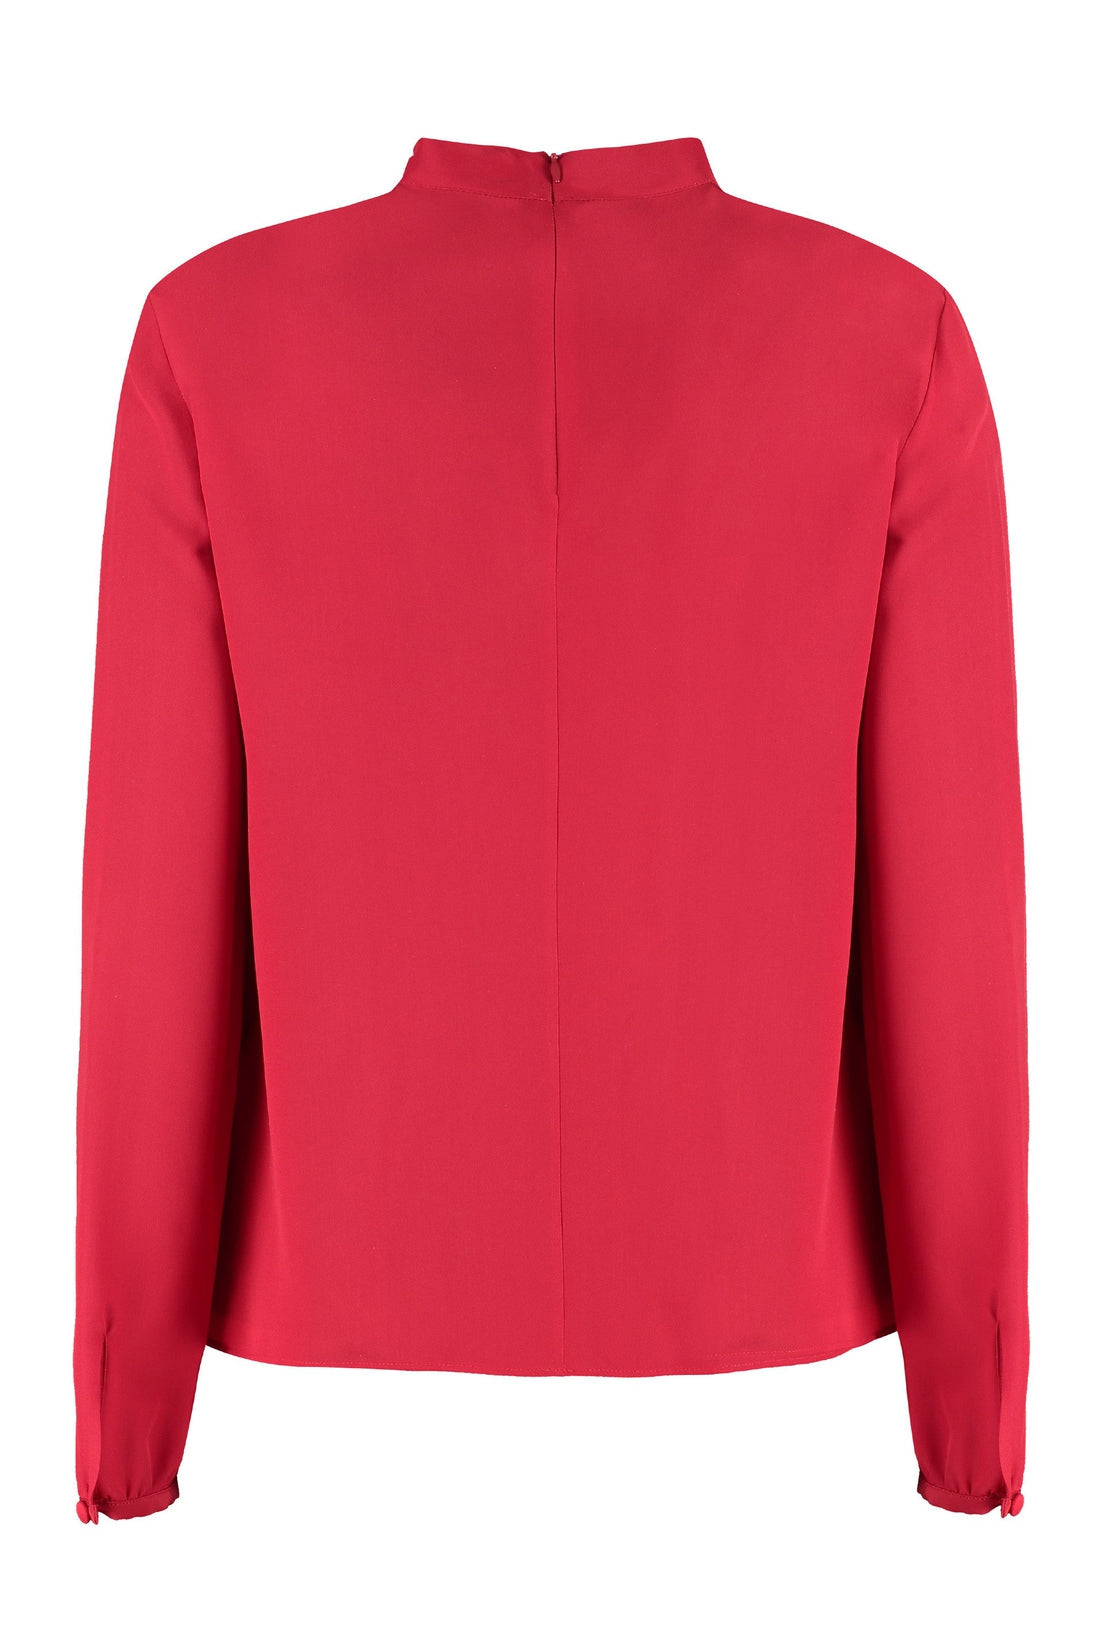 RED VALENTINO-OUTLET-SALE-Pussy-bow silk blouse-ARCHIVIST